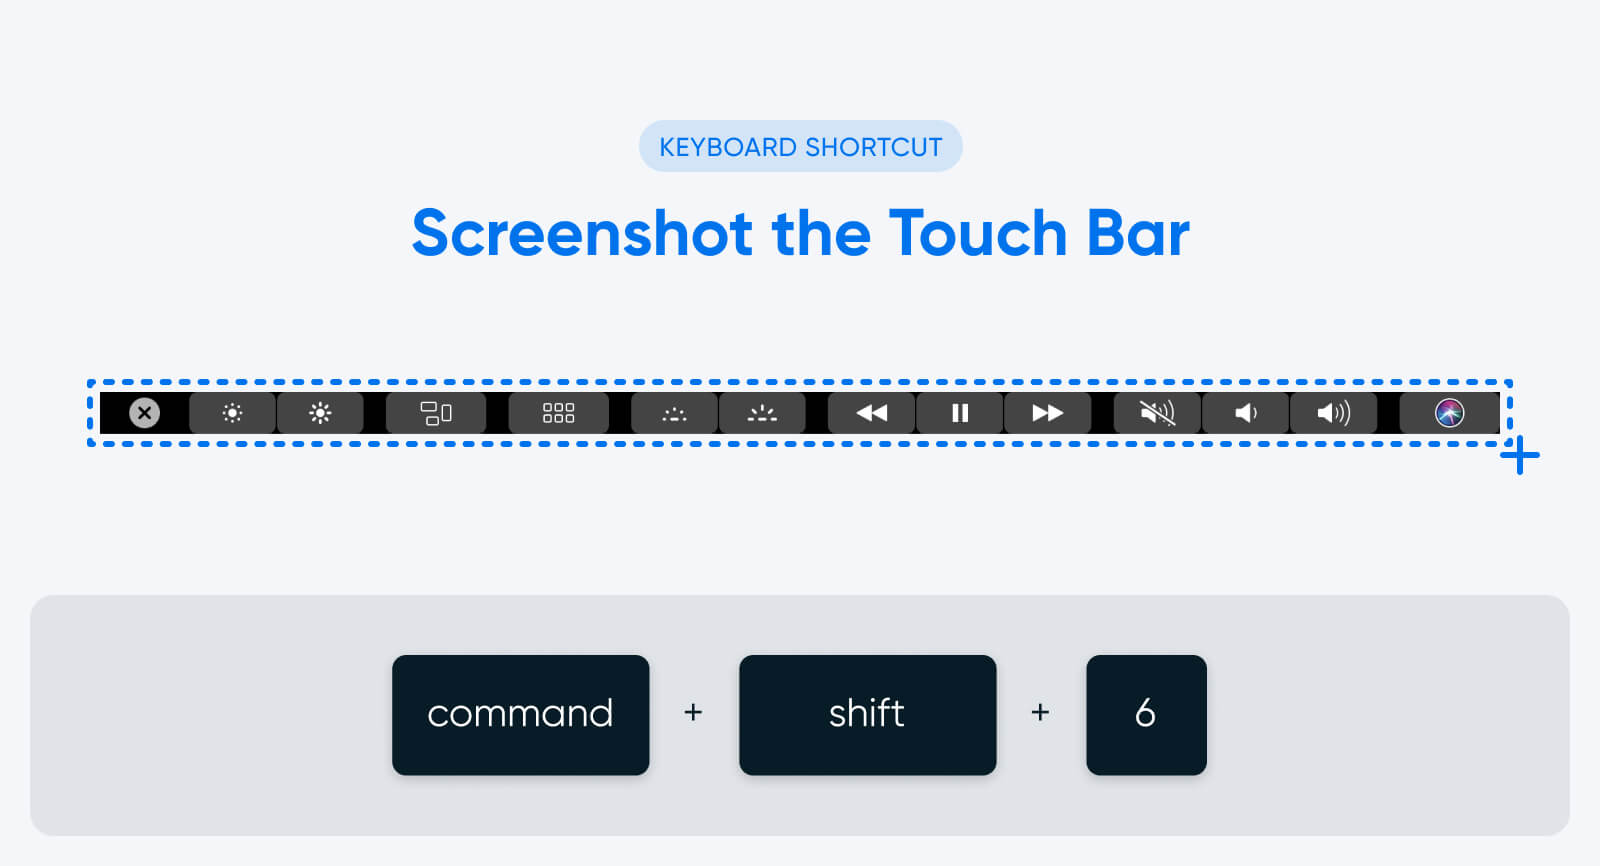 How to screenshot the Touch Bar on Mac